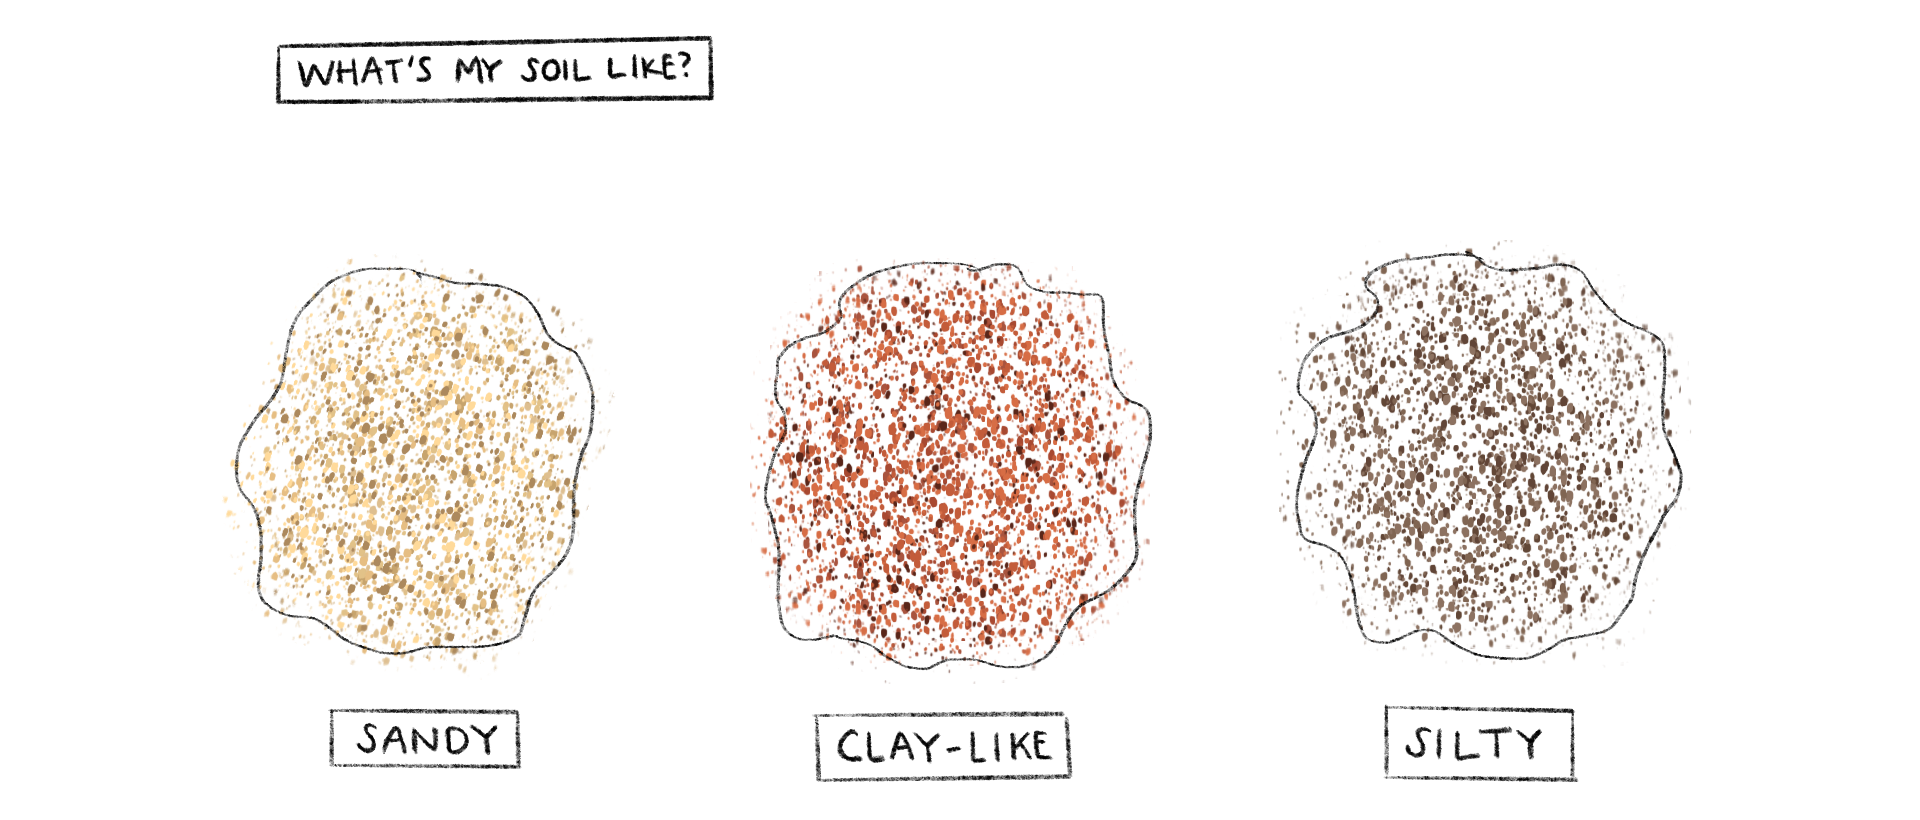 Drawing of three blobs of colored textures signifying different characteristics that make up soil